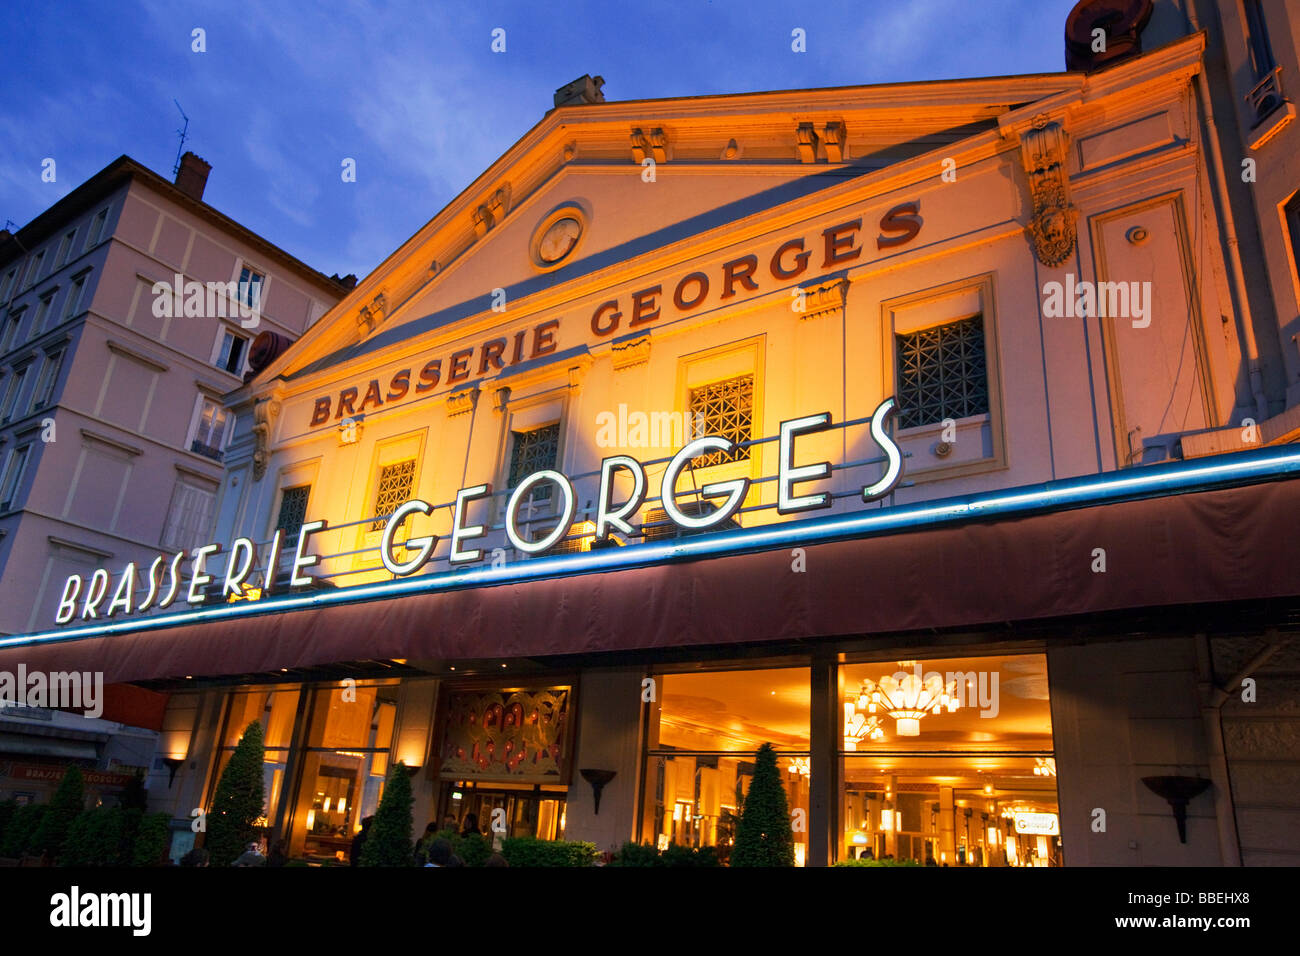 Brasserie Georges outdoor at twilight Lyon Rhone Alps France Stock Photo